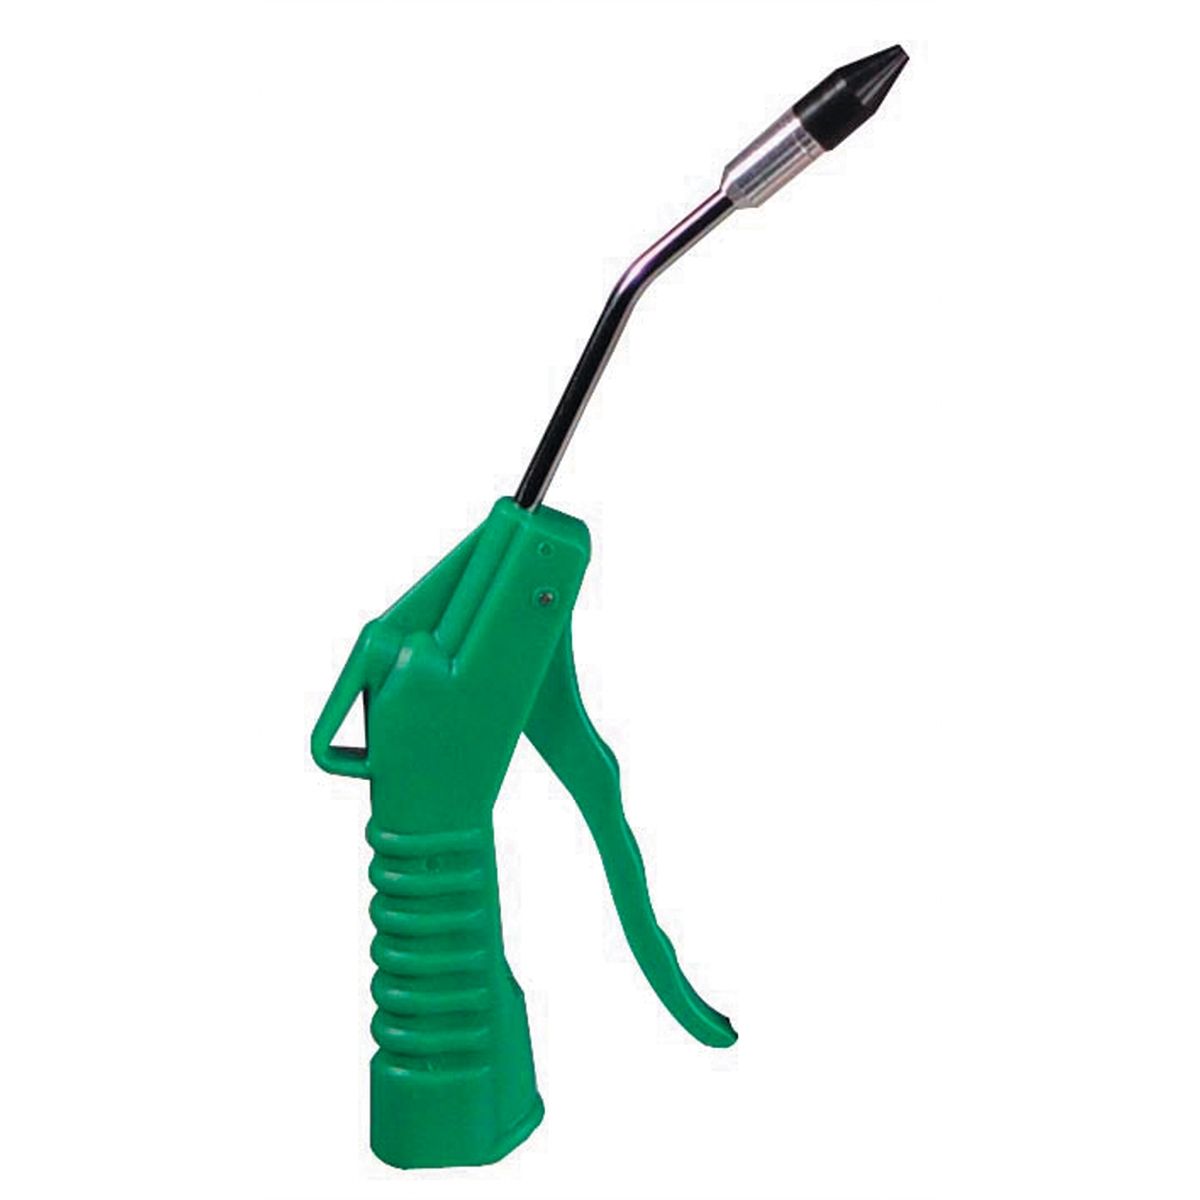 Air Blow Gun - Variable Flow w/ Removable Rubber Tip - 4 In